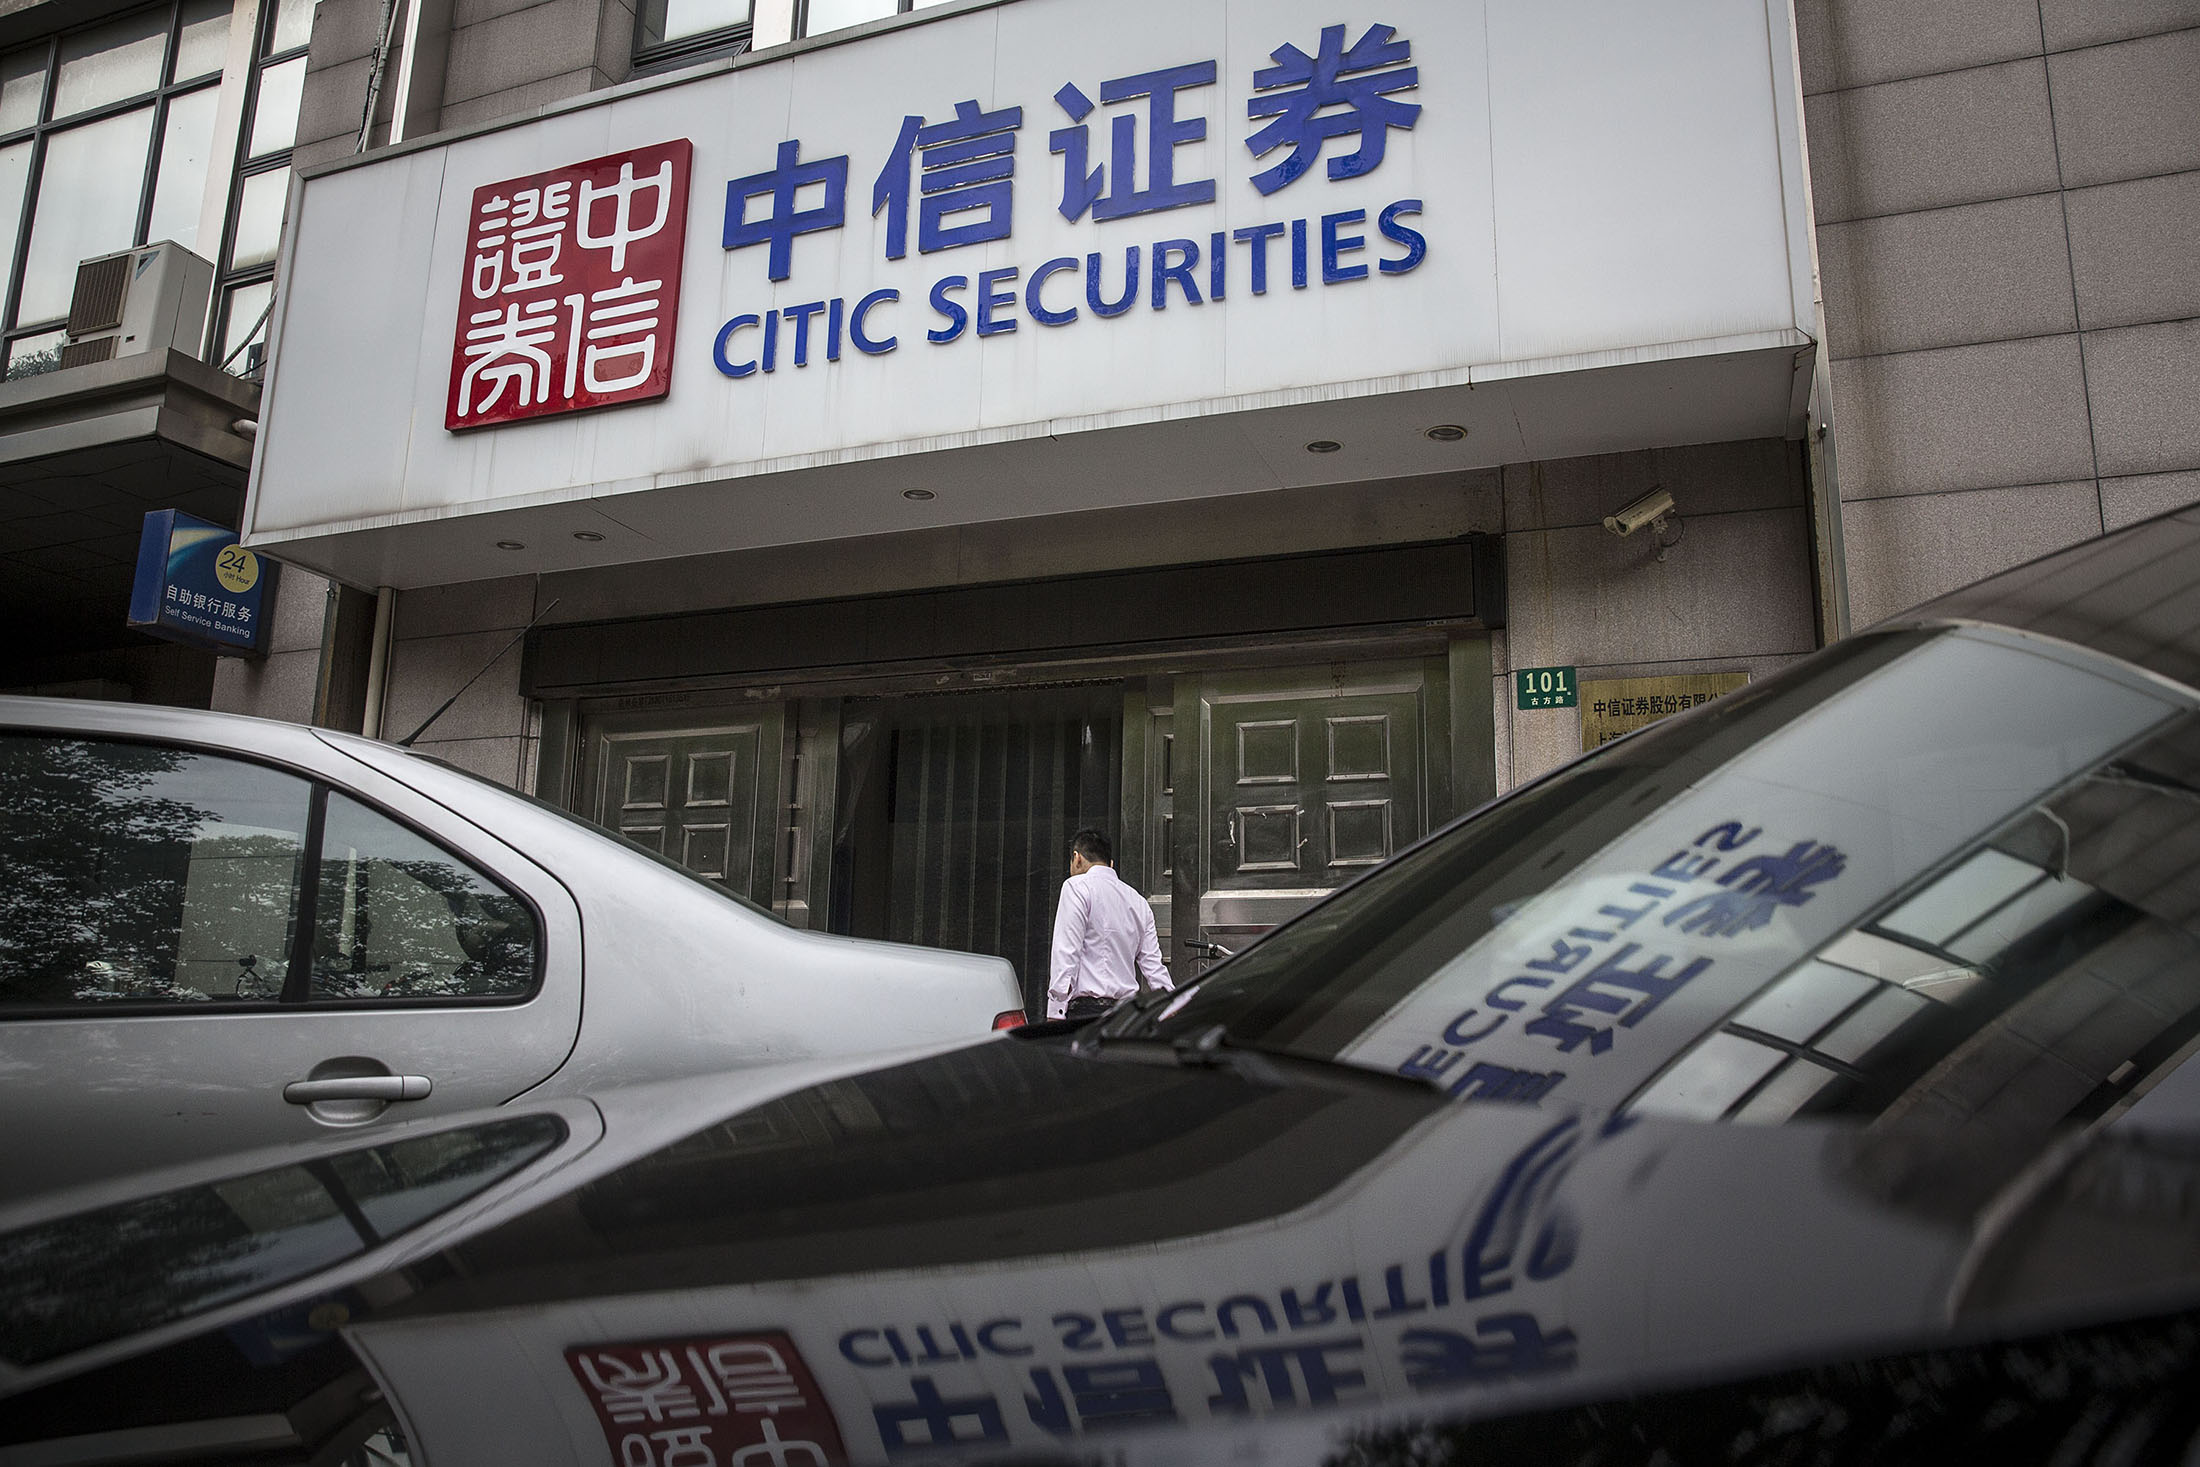 A pedestrian walks past a Citic Securities branch in Shanghai, China.
